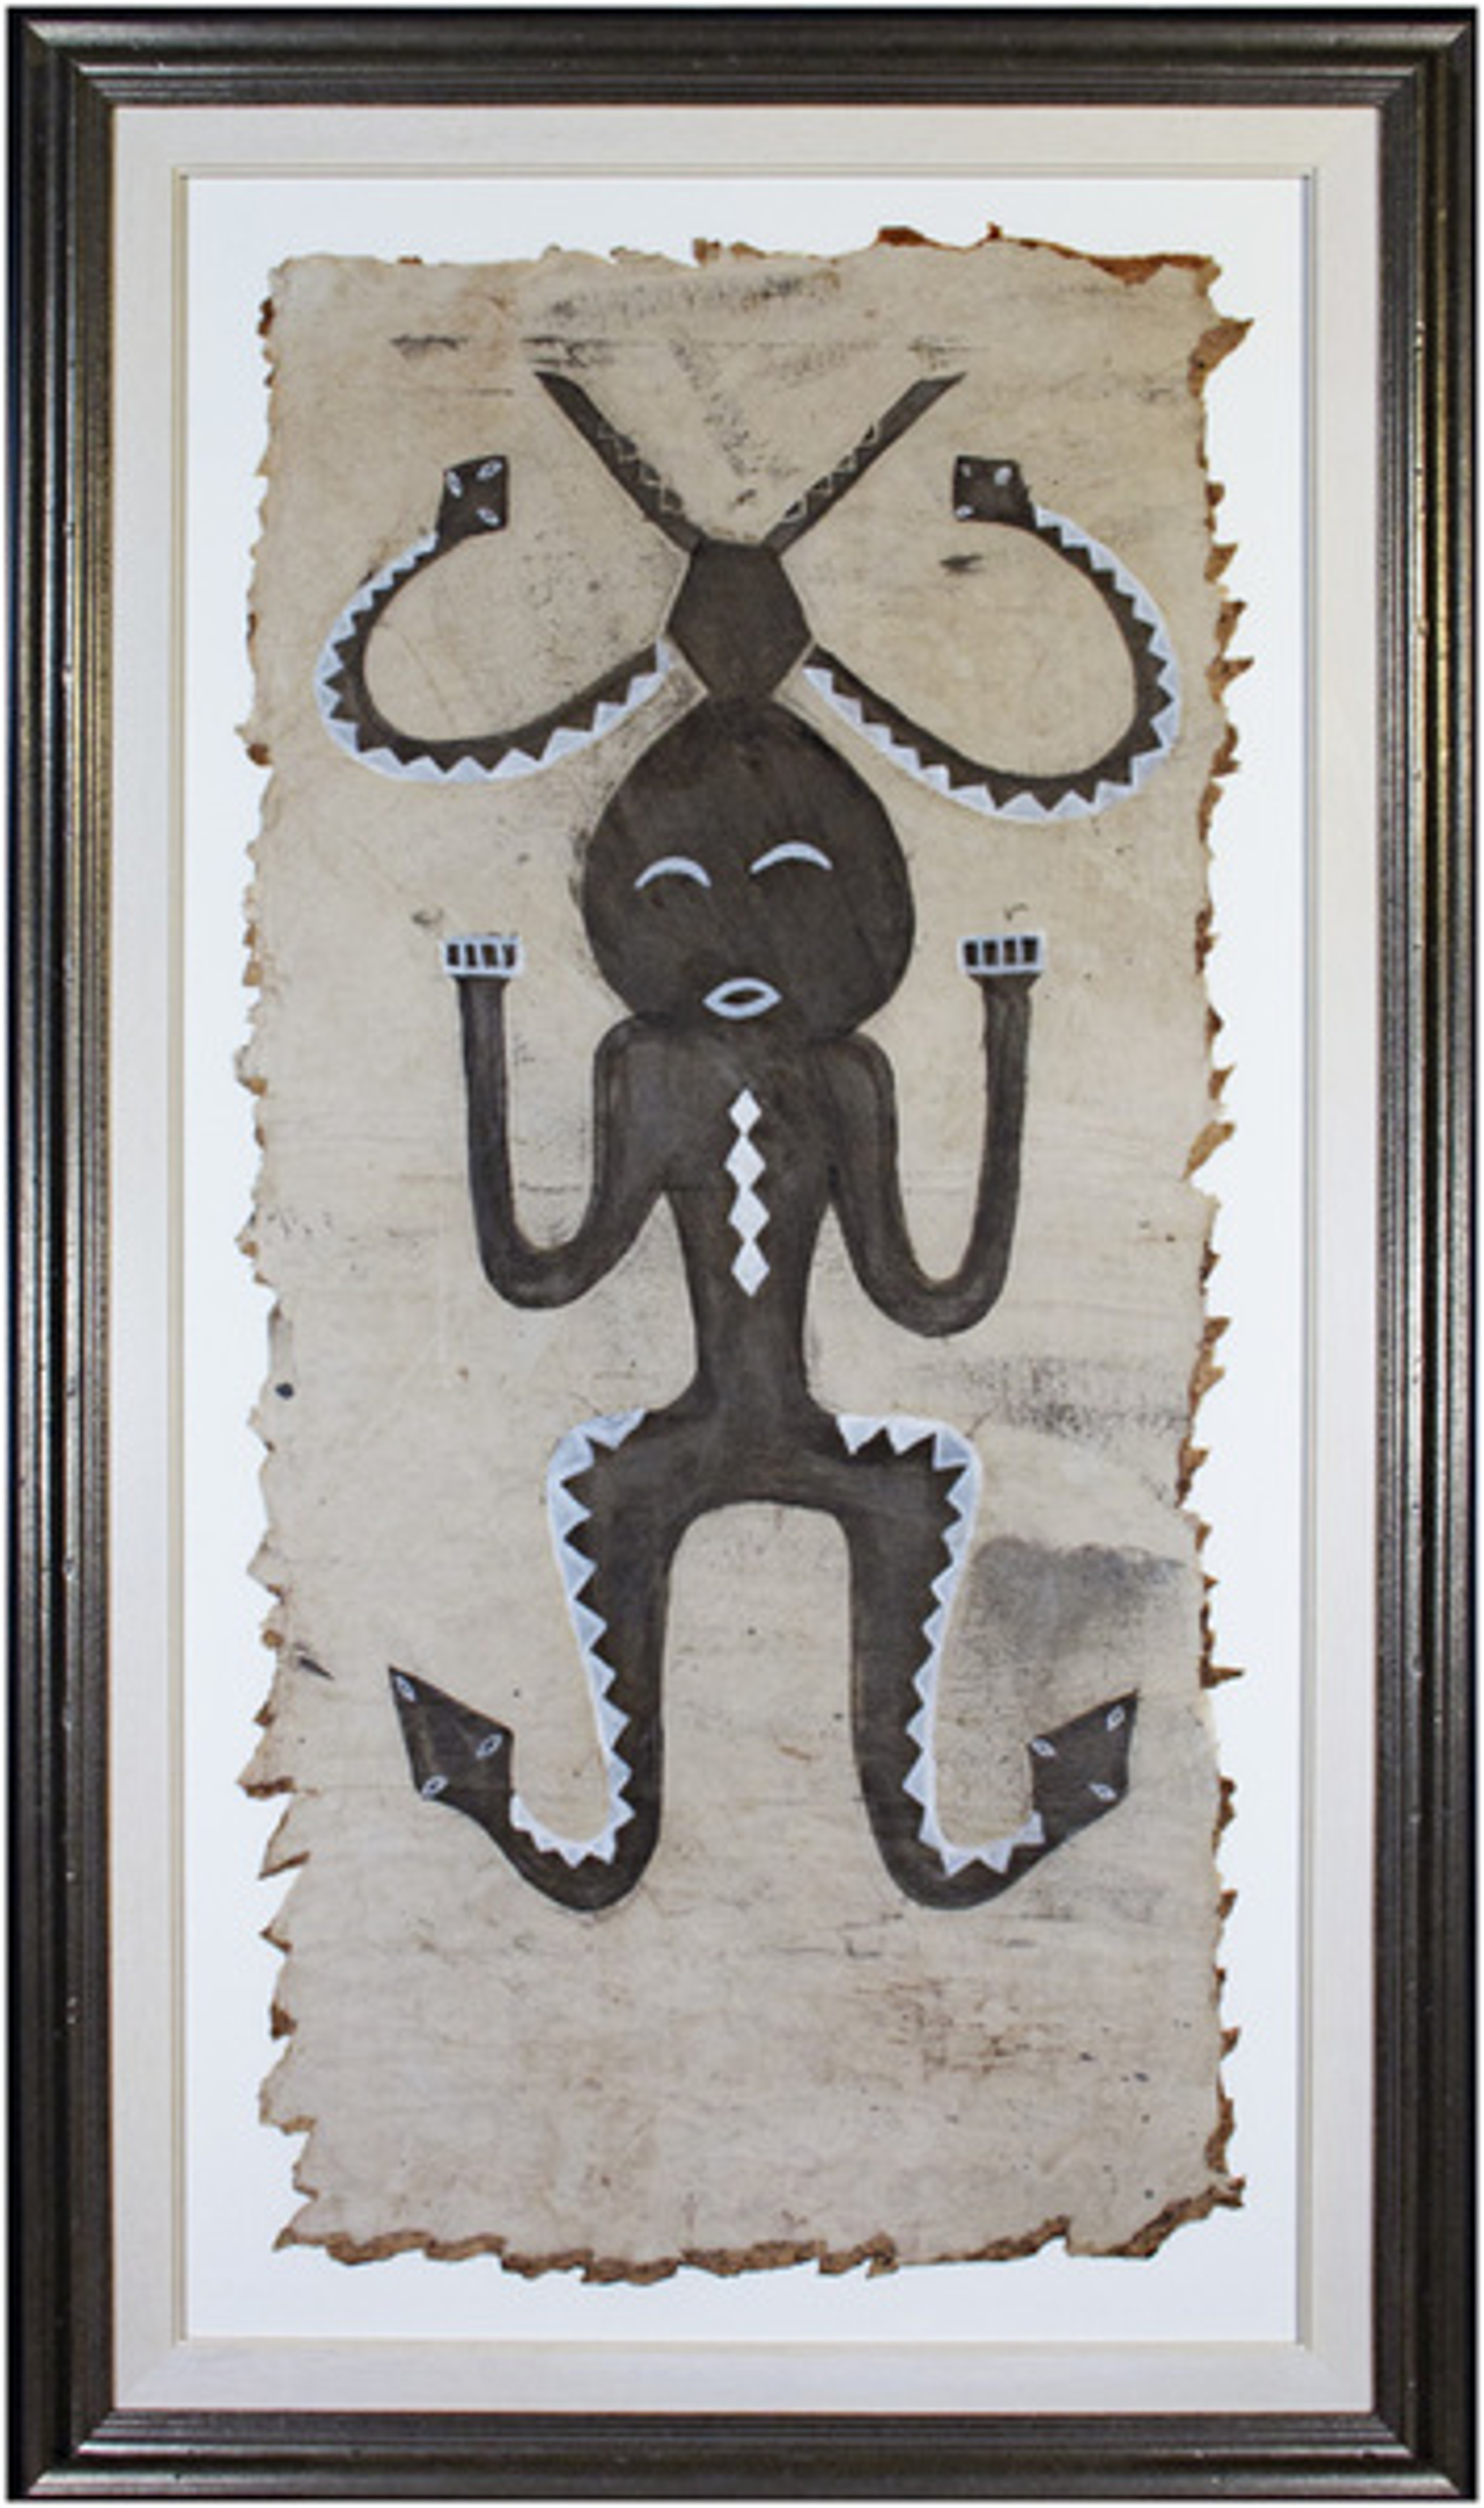 Anthropomorphic Figure by African